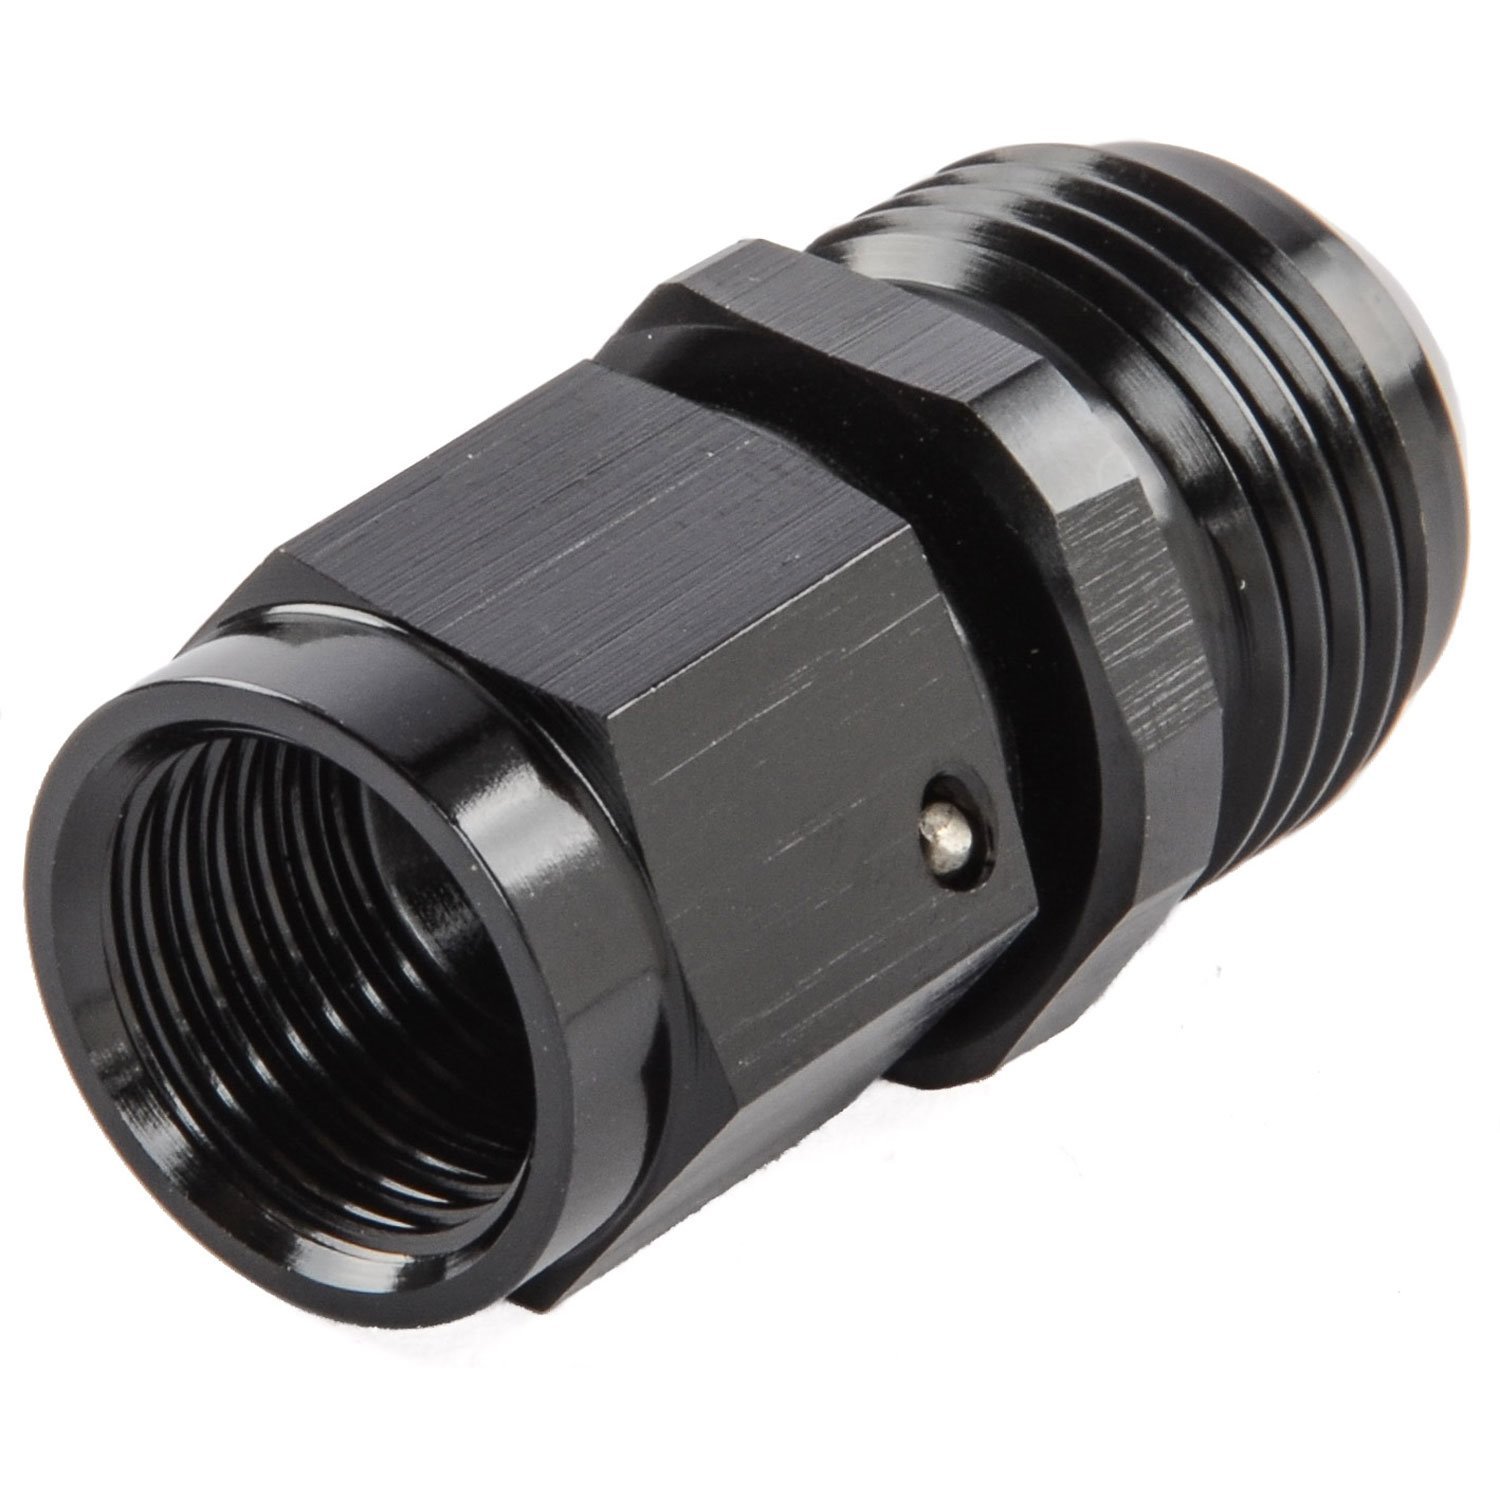 AN Female Swivel to Male Expander Fitting [-6 AN Female to -8 AN Male, Black Hard Anodized]